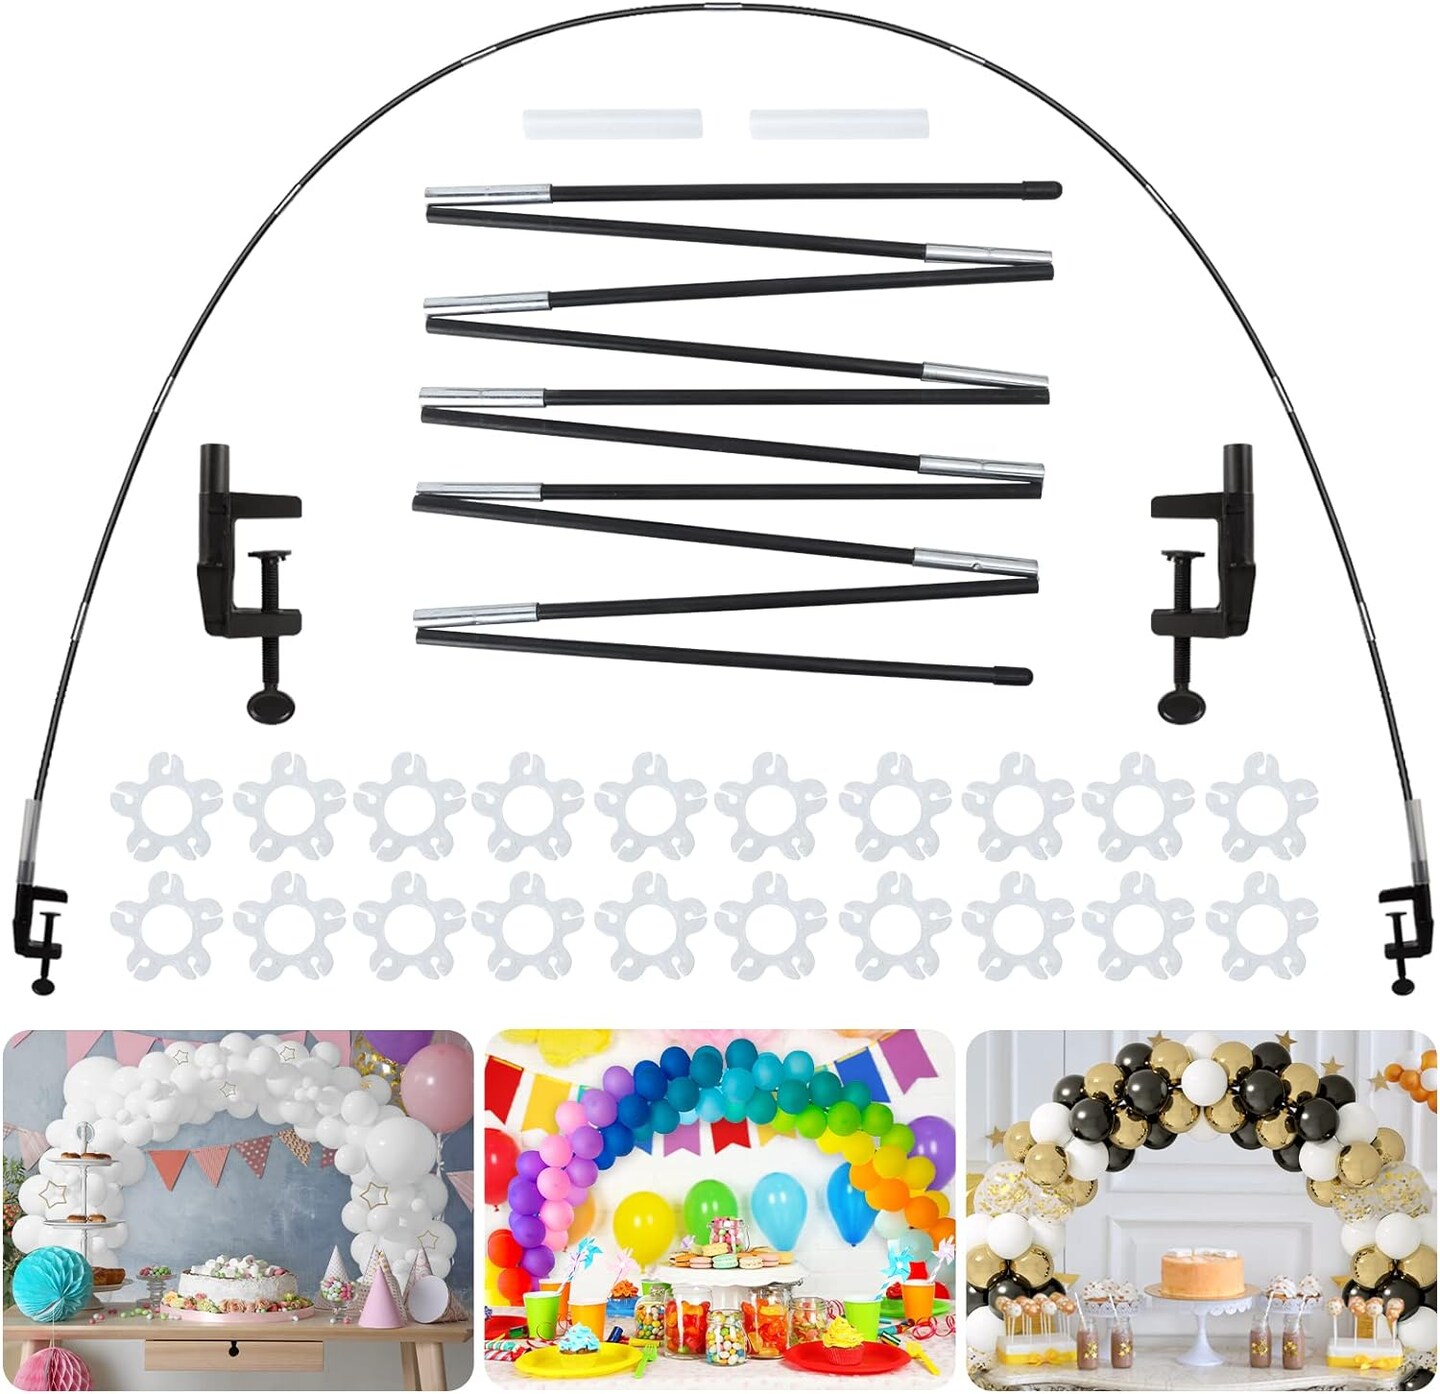 Table Balloon Arch Kit, Black Adjustable Balloon Arch Stand Frame for Different Size Tables Balloon Garland Decorations of Birthday Party Wedding Baby Shower Christmas and Festival Decoration